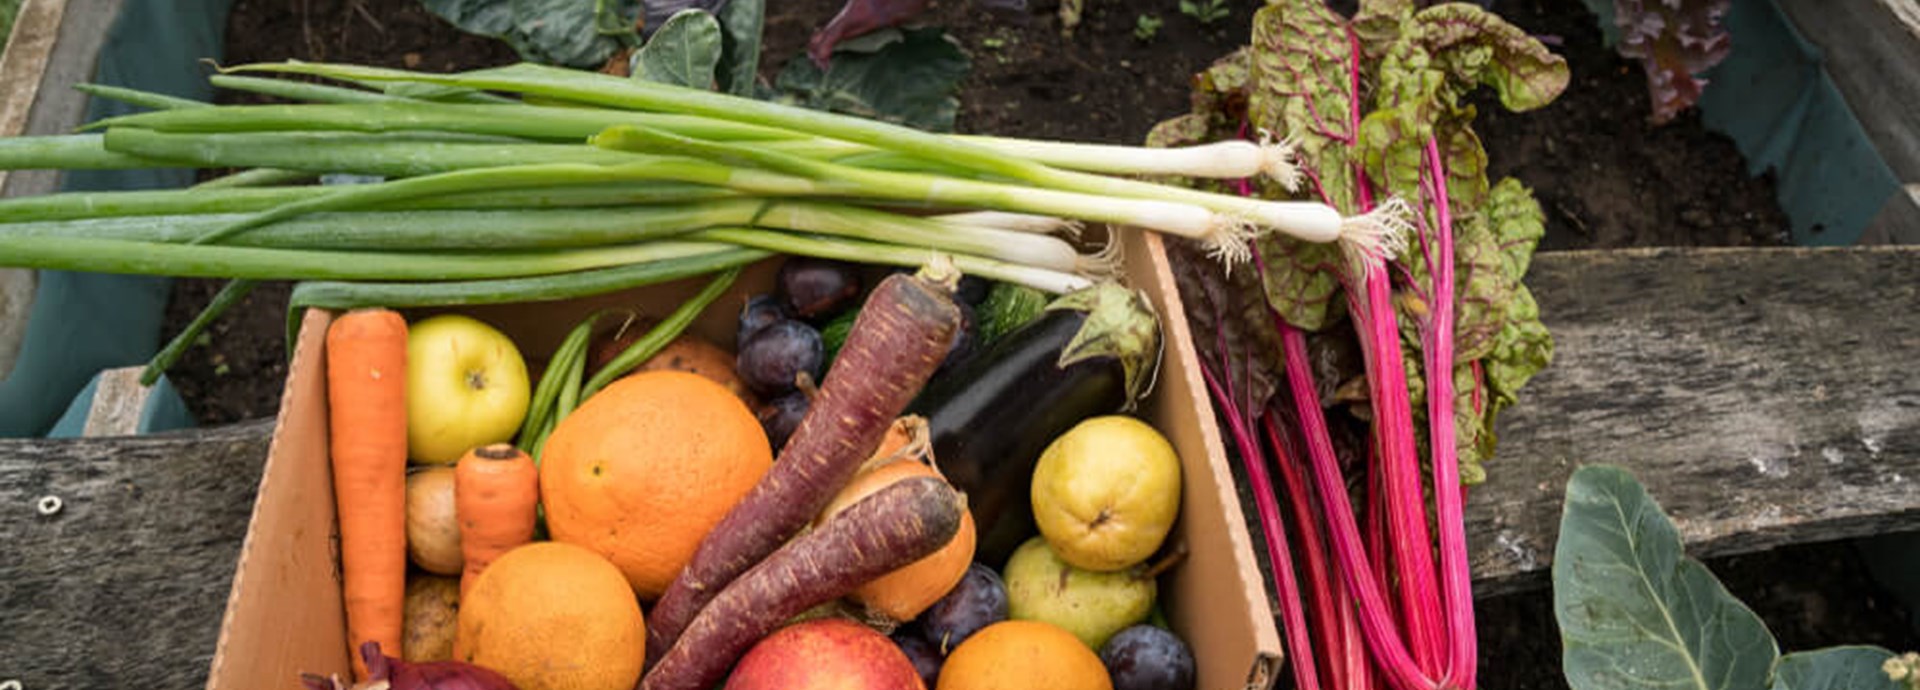 Fruits and vegetables from the garden packed in a box